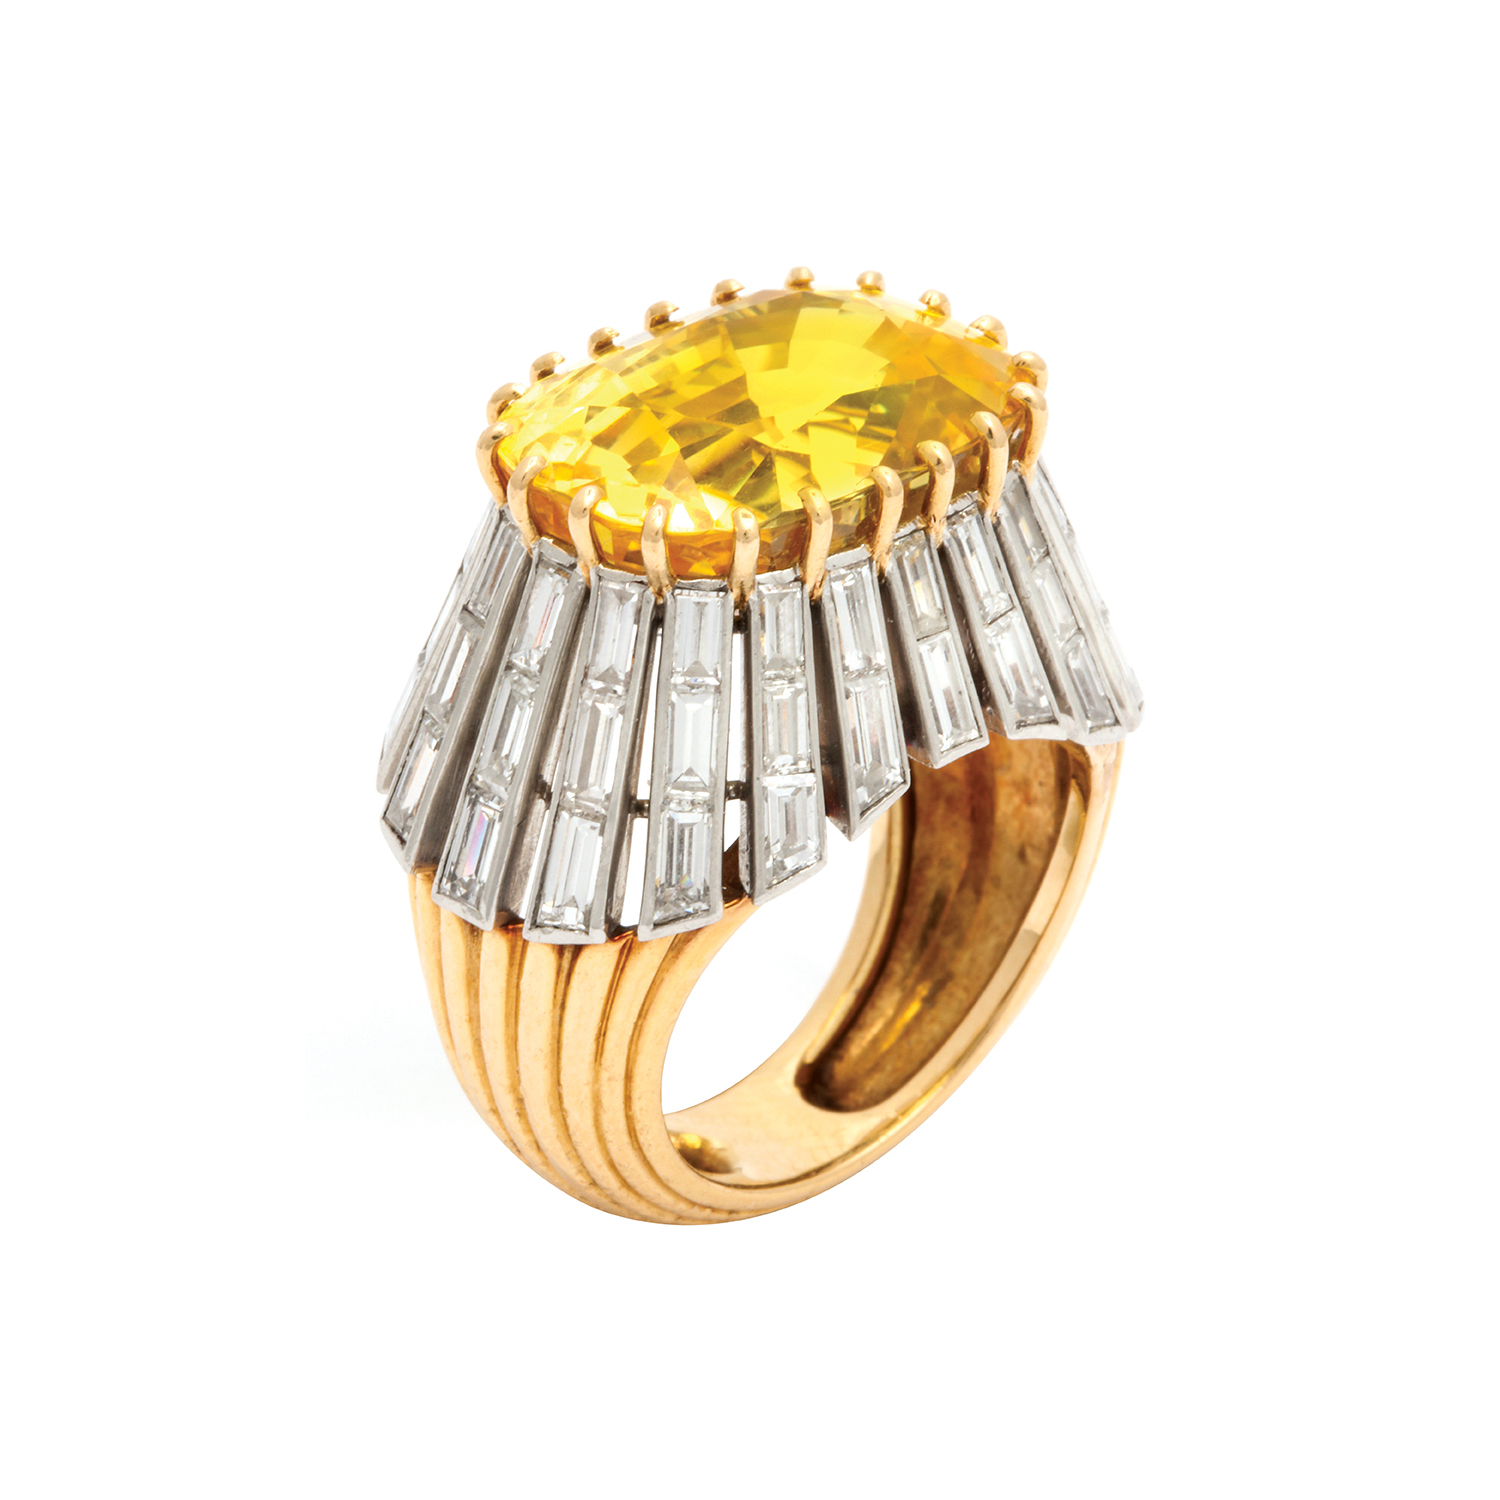 main view of yellow sapphire cocktail ring set in a gold and baguette-cut diamond mount